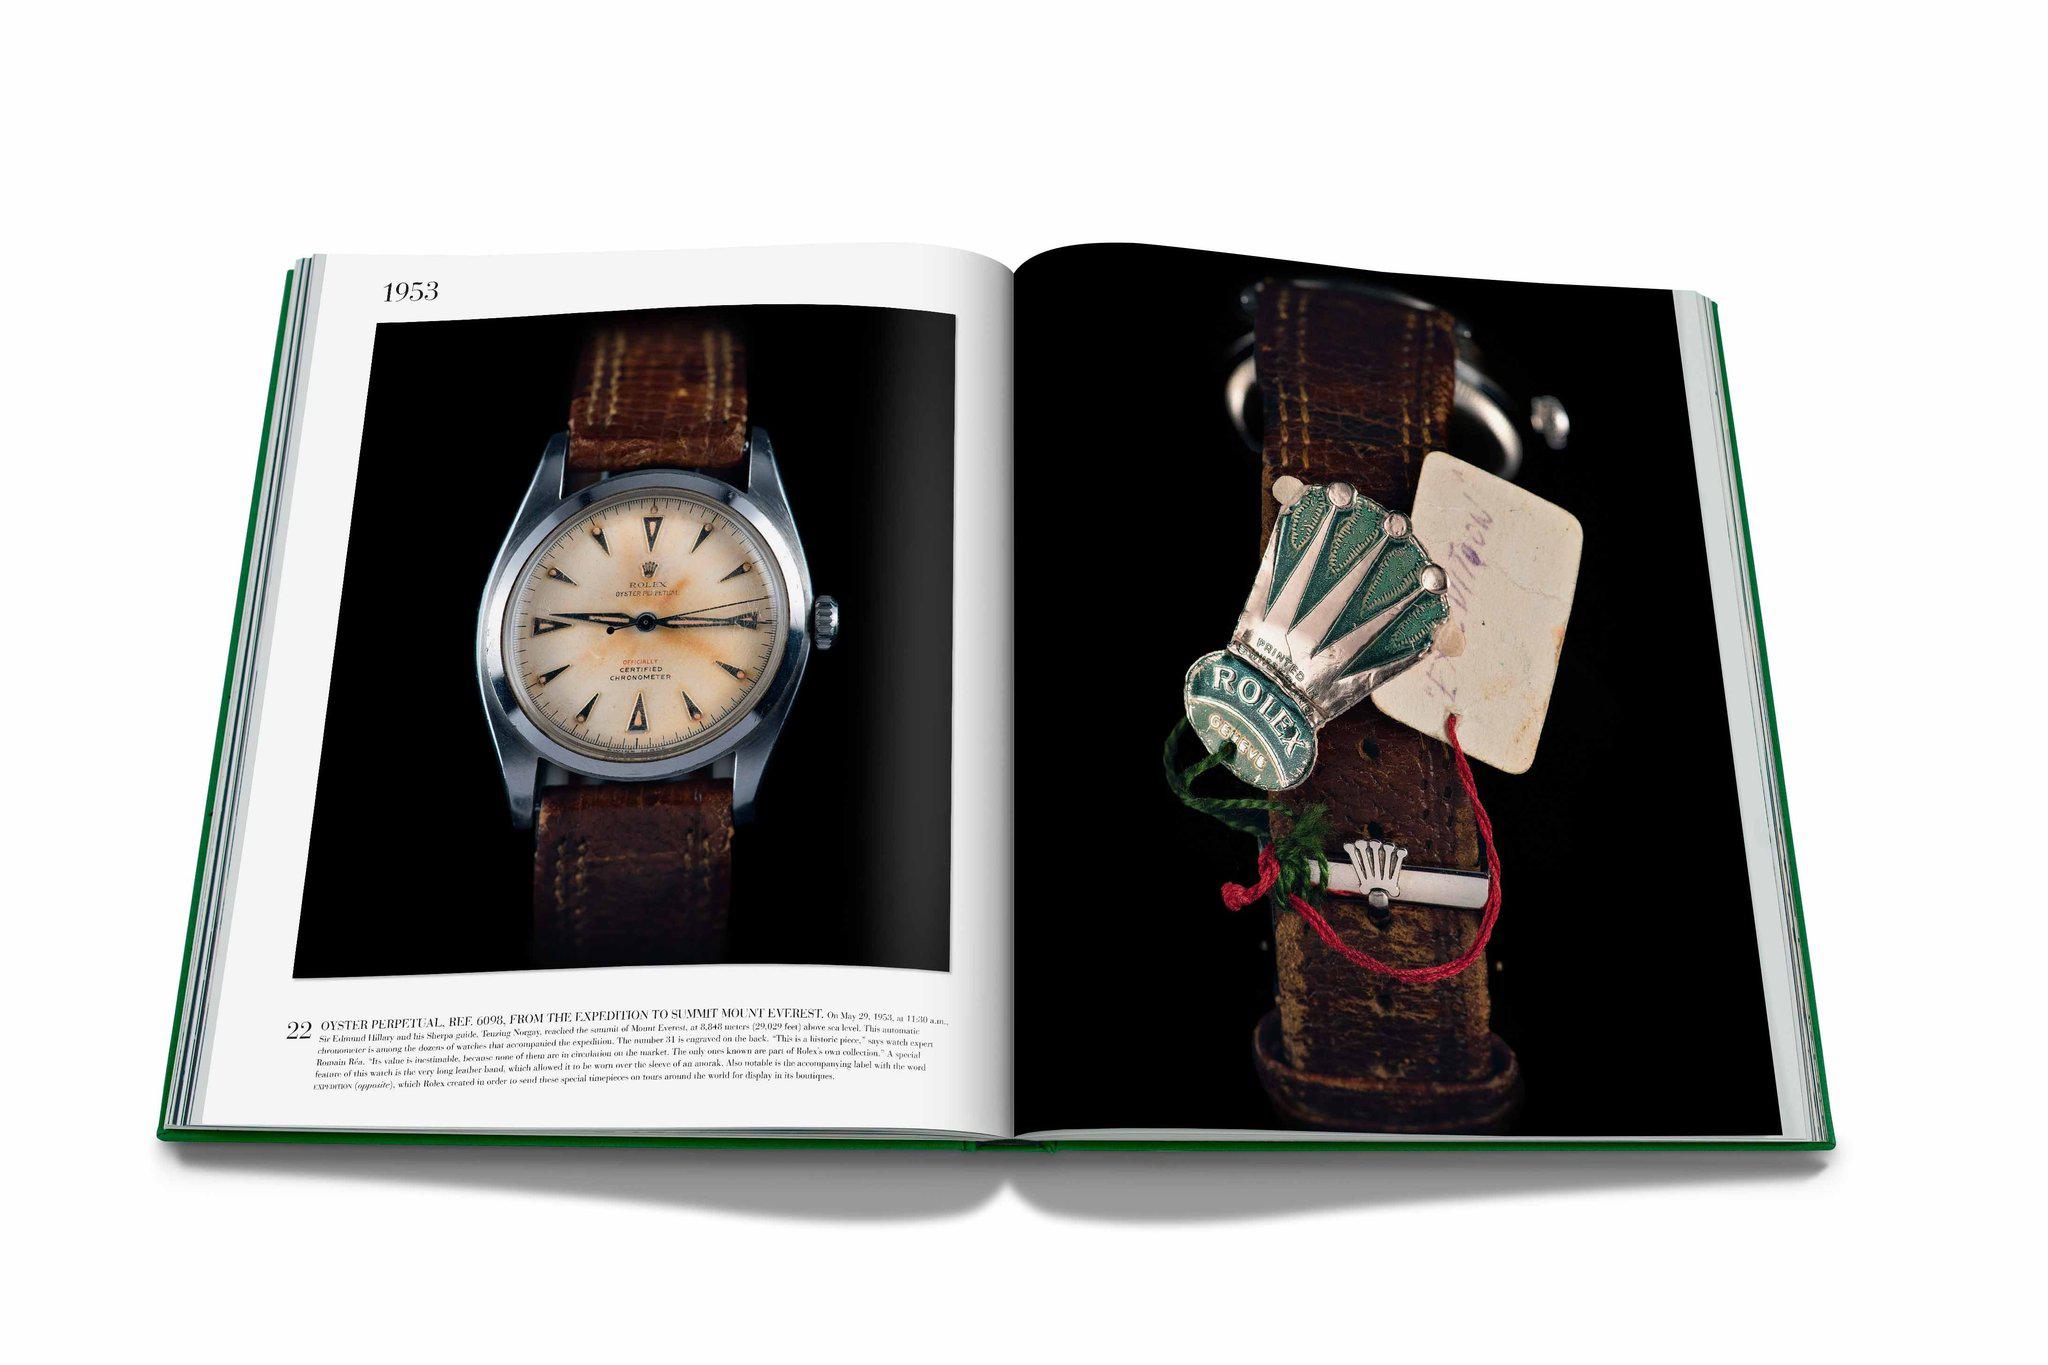 Assouline - Rolex The Impossible Collection - Coffee Table Book-TOJU Interior